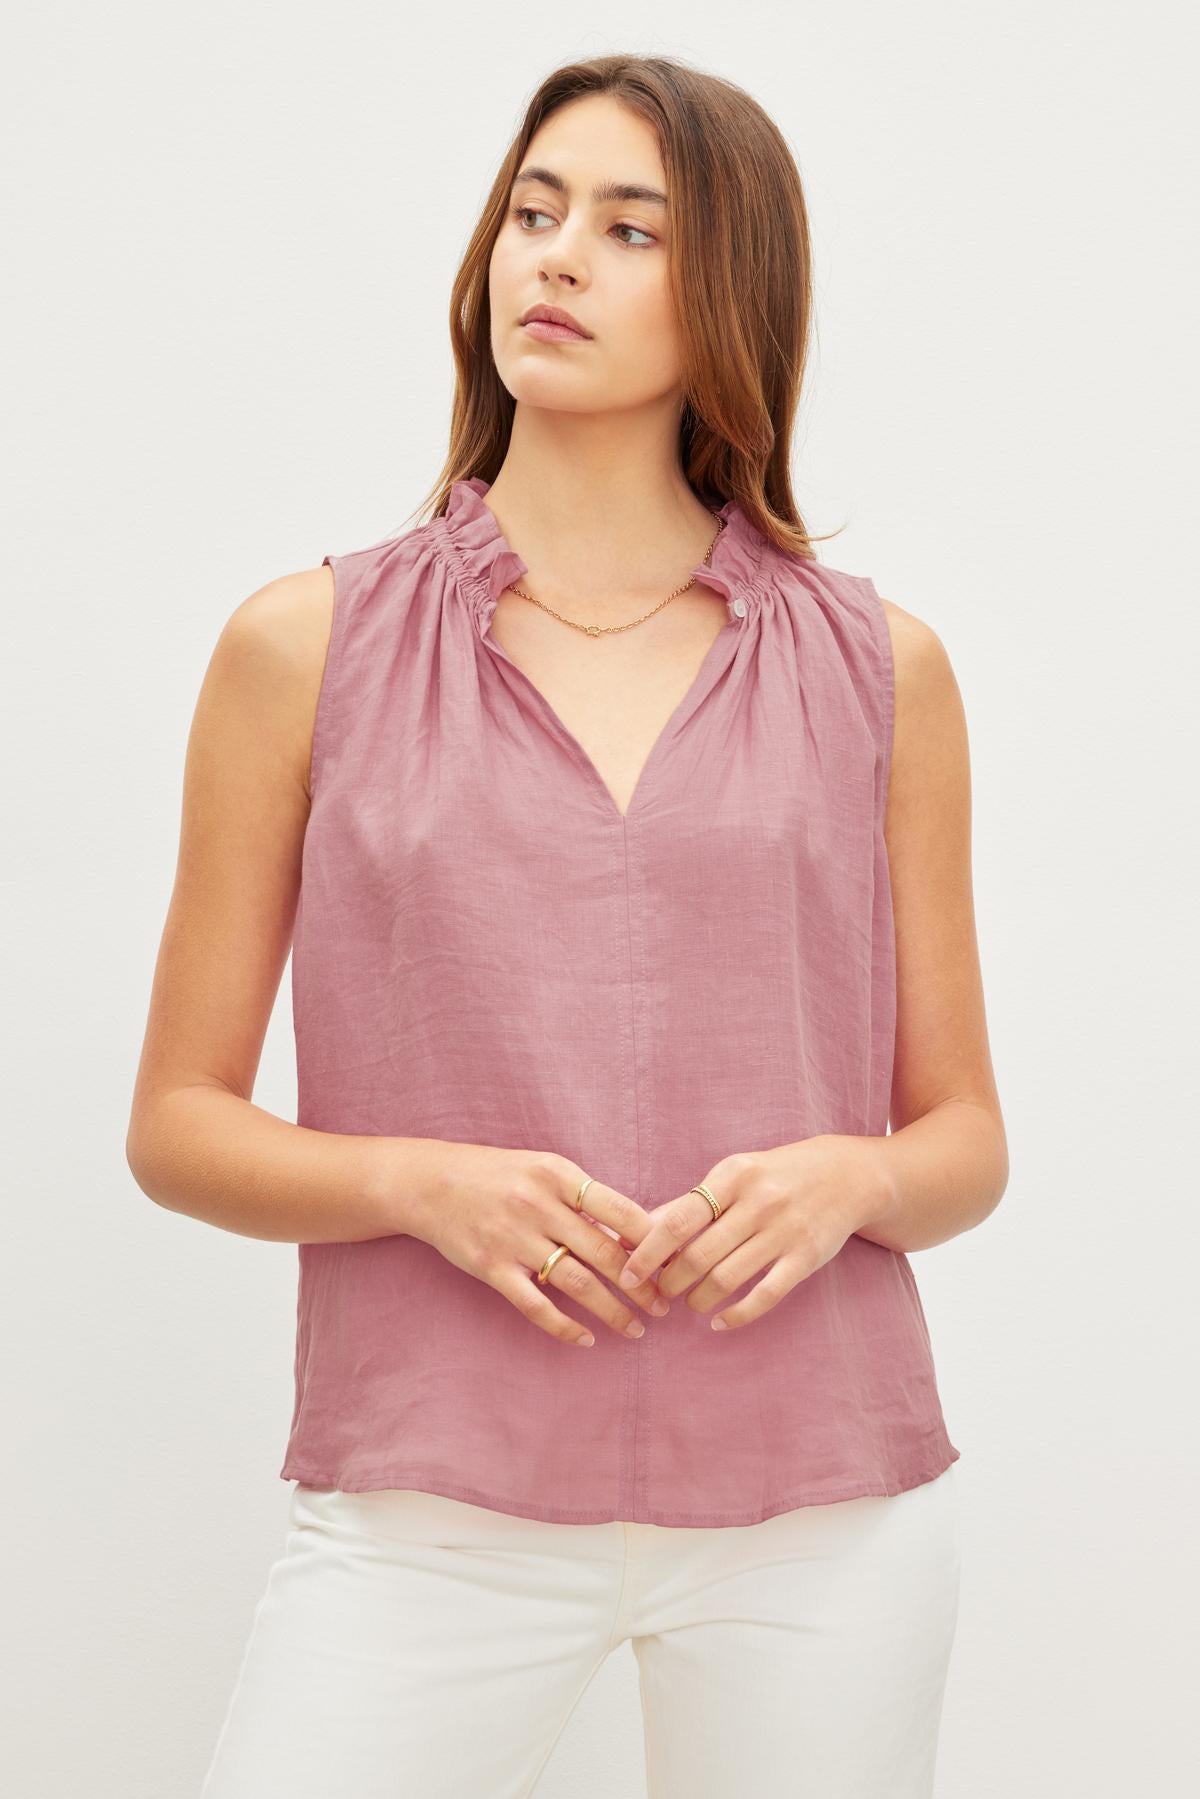 Woman in a pink MASIE LINEN TANK TOP from Velvet by Graham & Spencer and white pants, standing against a plain background, looking to the side with a serene expression.-36571197374657